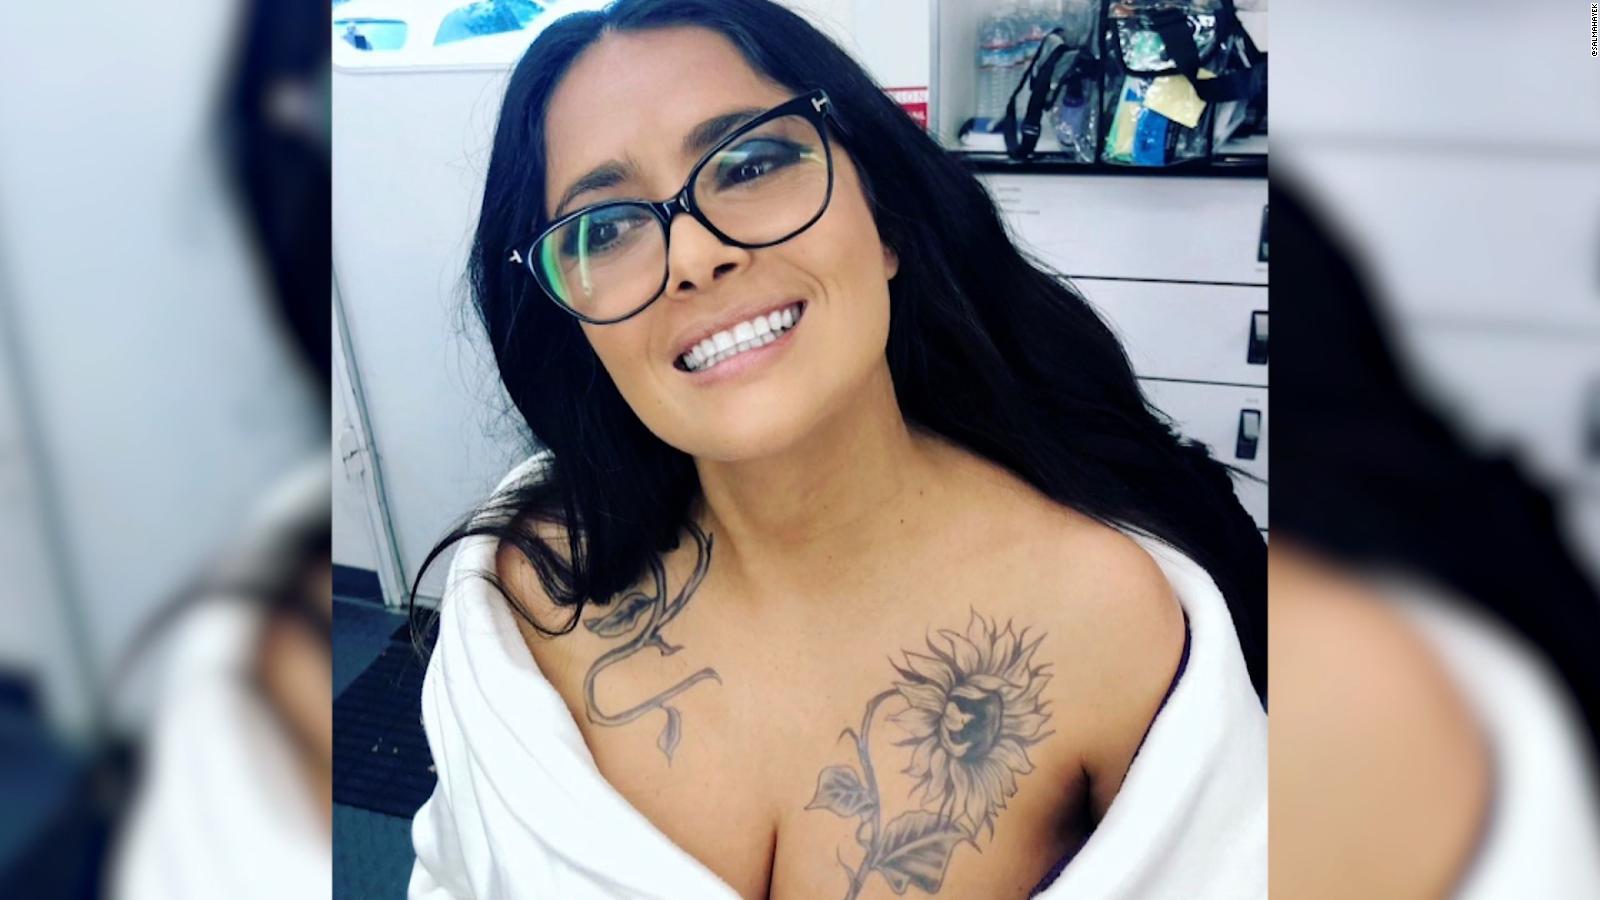 Salma Hayek Surprises Her Fans By Showing Her New Tattoos Video Cnn The Limited Times